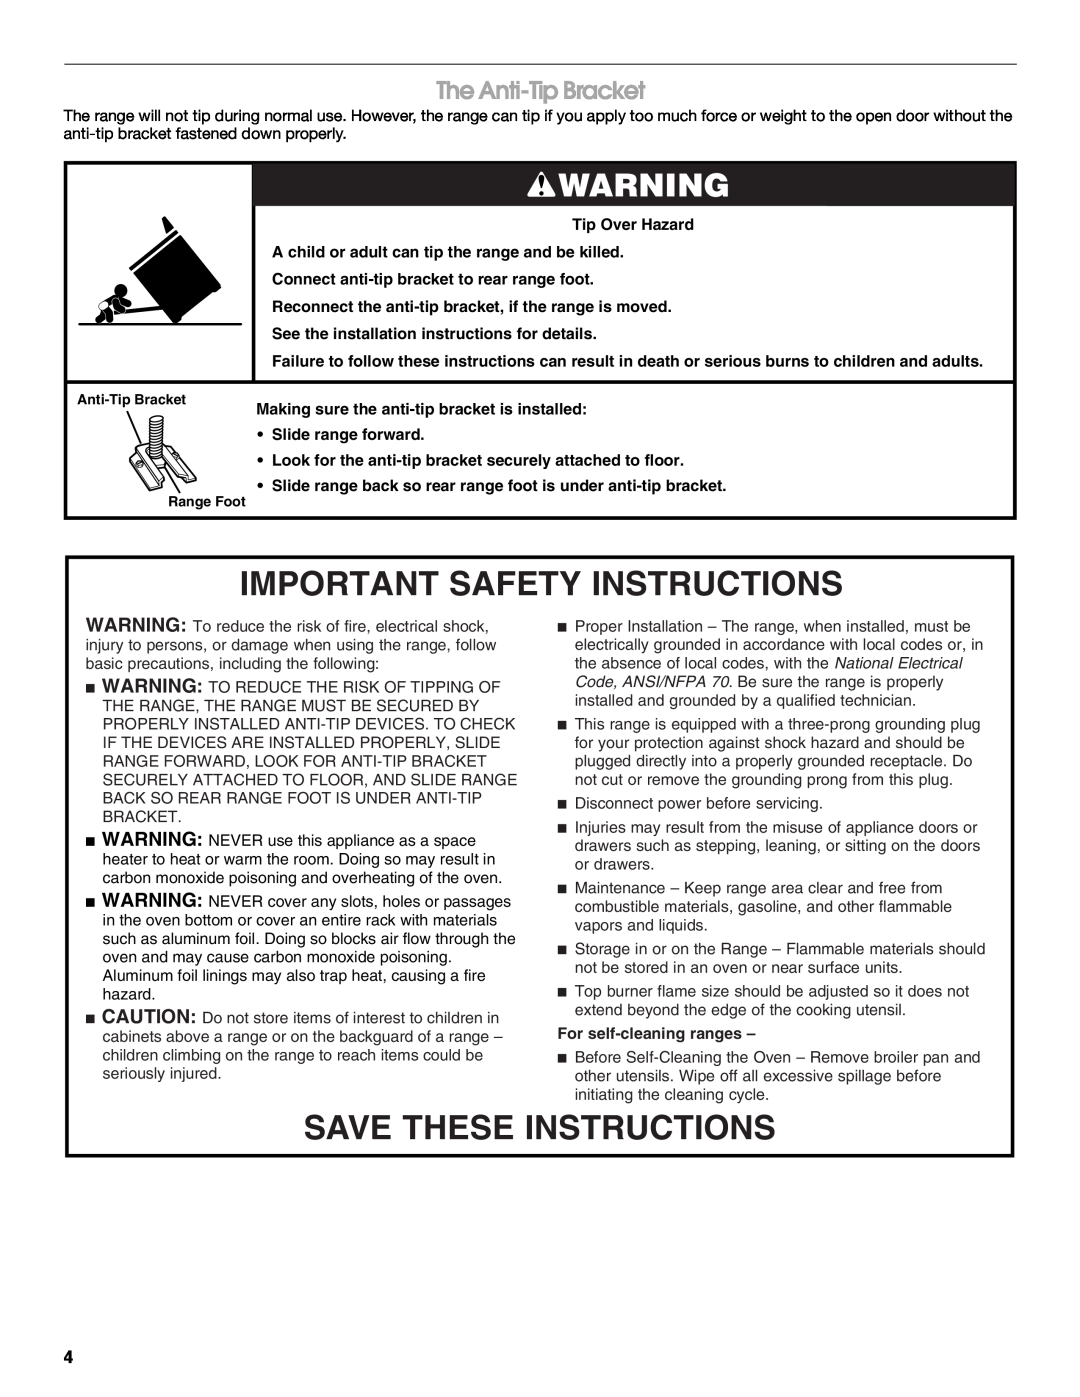 Whirlpool W10121768B manual Important Safety Instructions, Save These Instructions, The Anti-Tip Bracket 